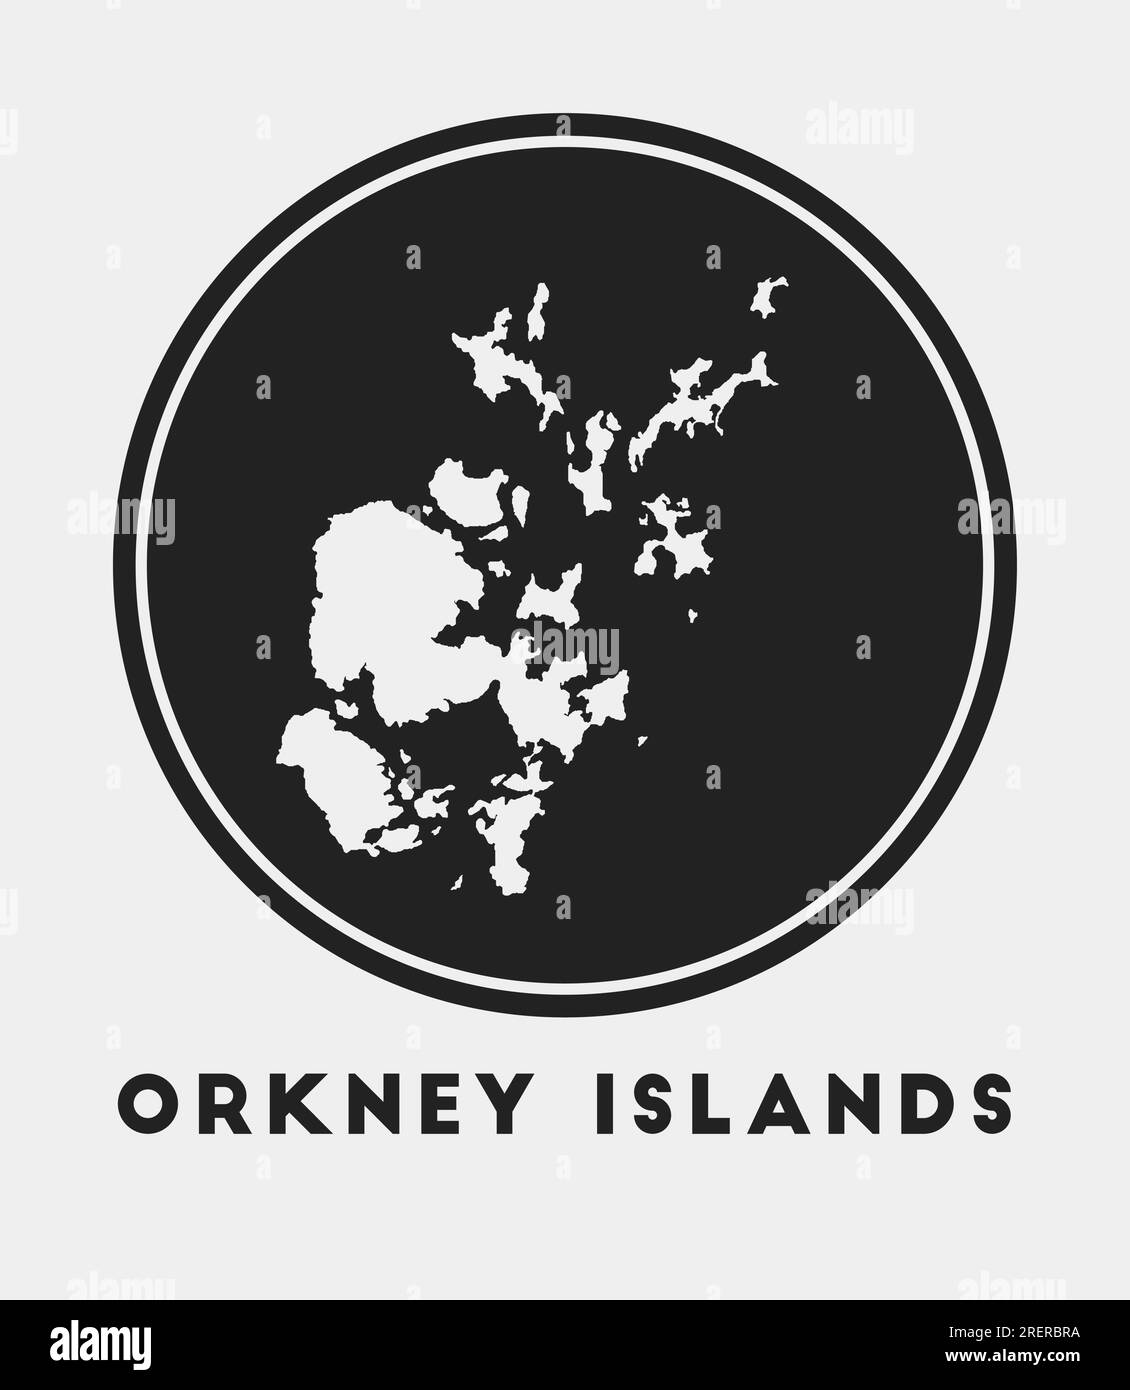 Orkney Islands icon. Round logo with island map and title. Stylish ...